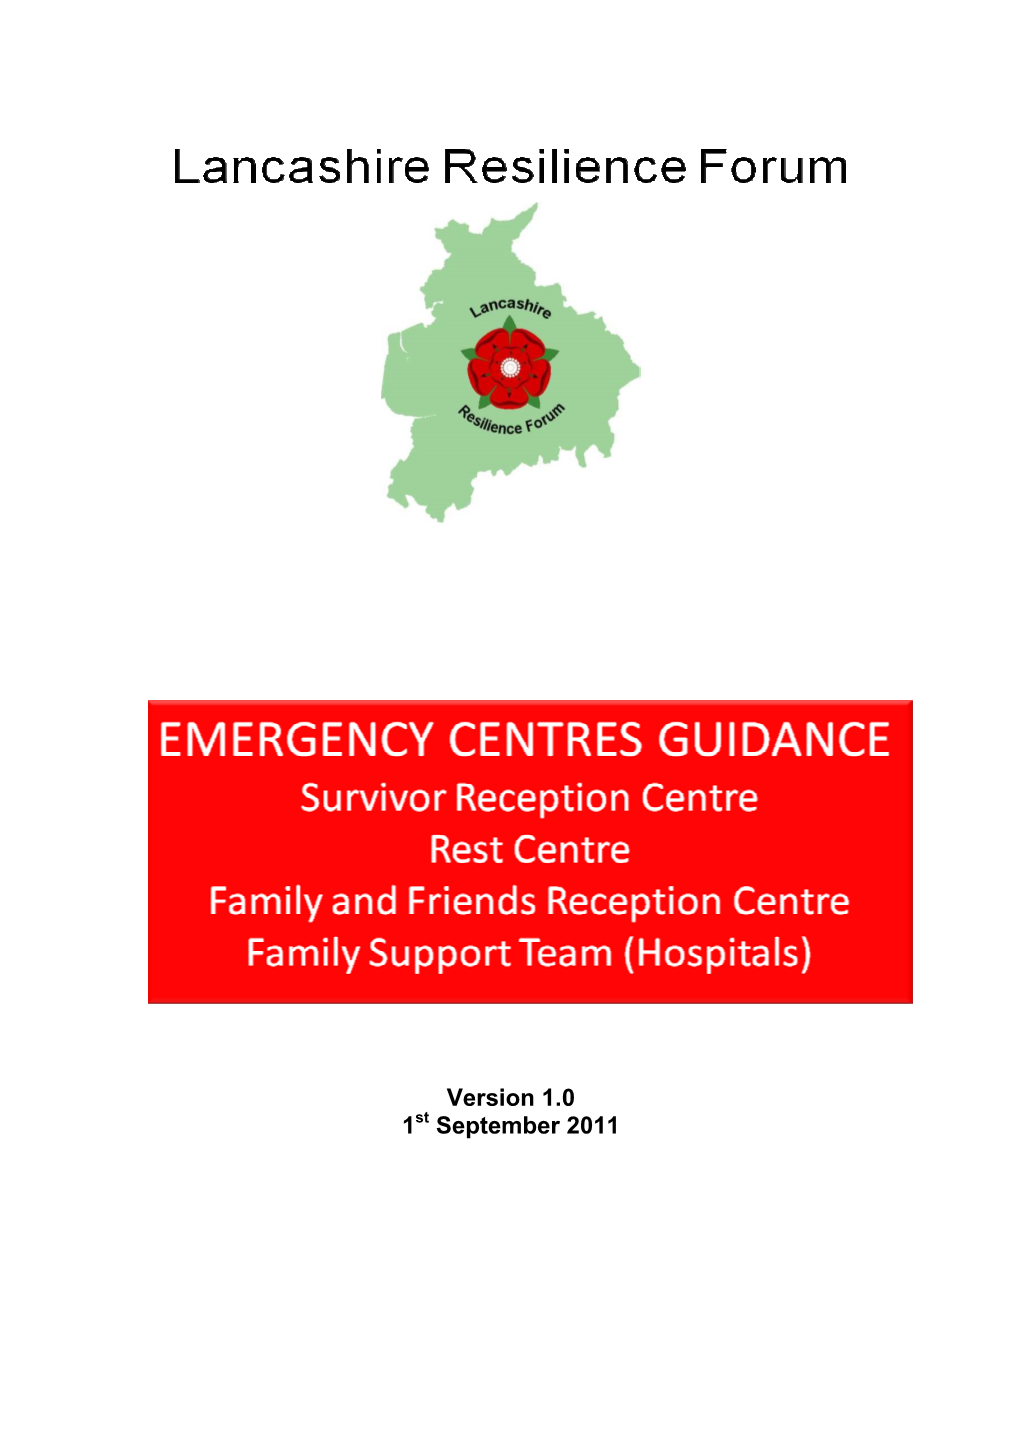 Emergency Centres Guidance